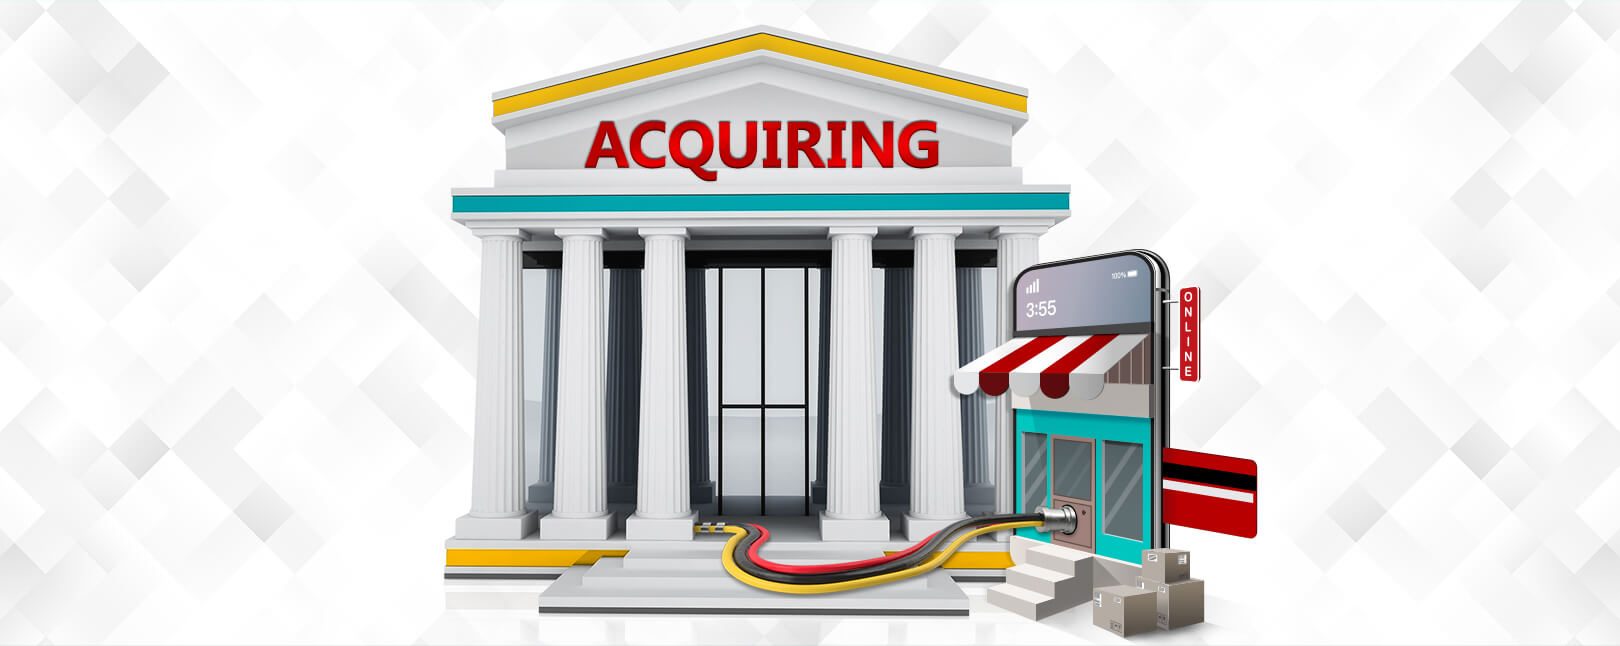 Acquiring Bank Acquirer